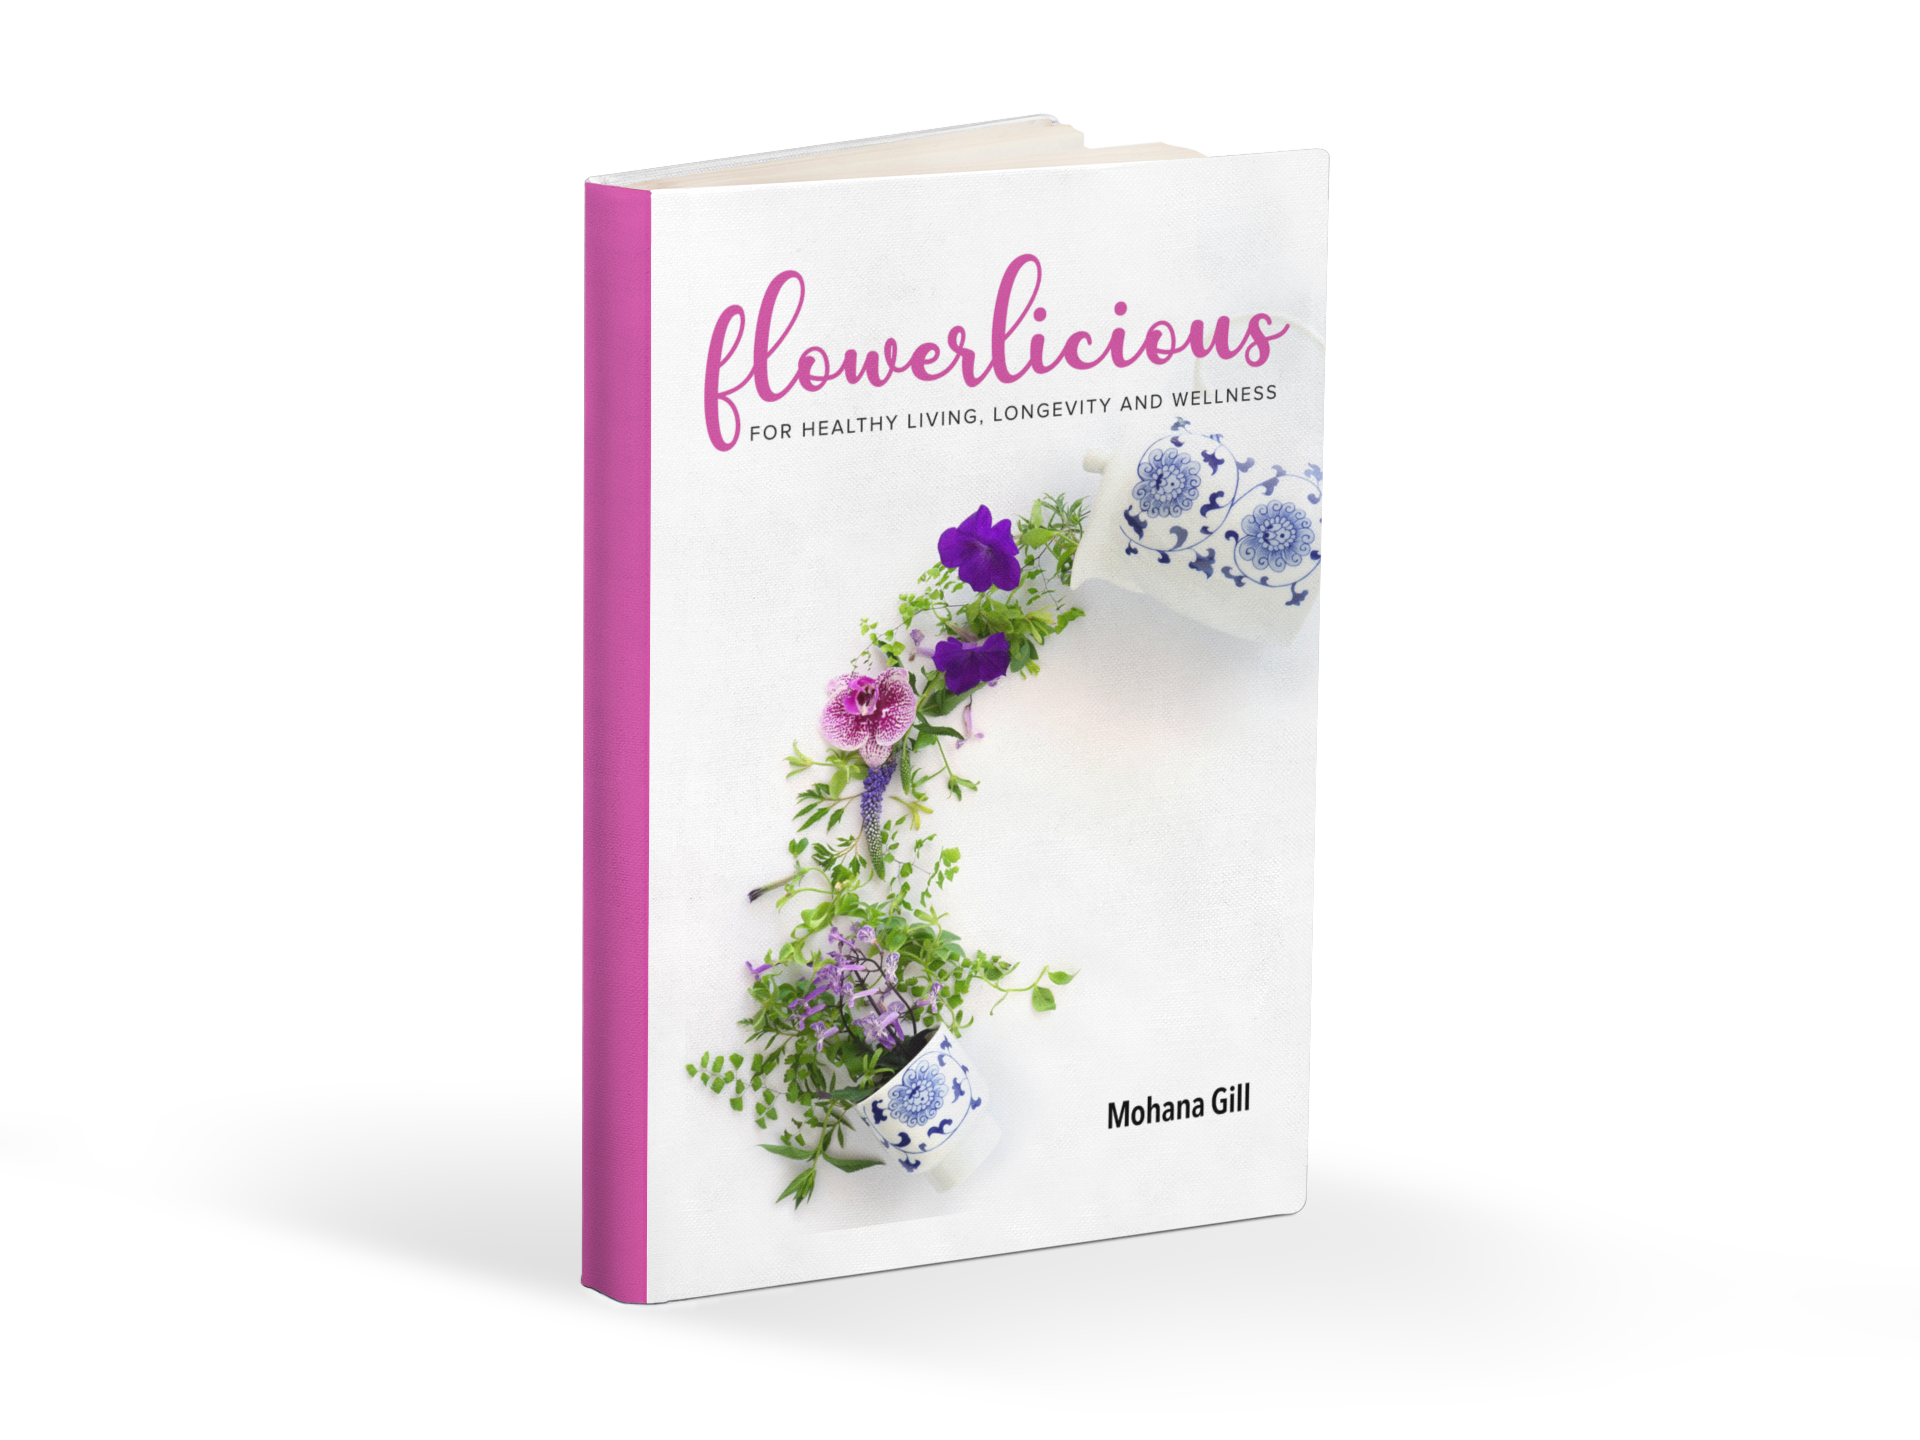 Award-Winning Author, Mohana Gill, Offers an Inspired and Practical Approach to Cooking with Edible Flowers in Cookbook Flowerlicious